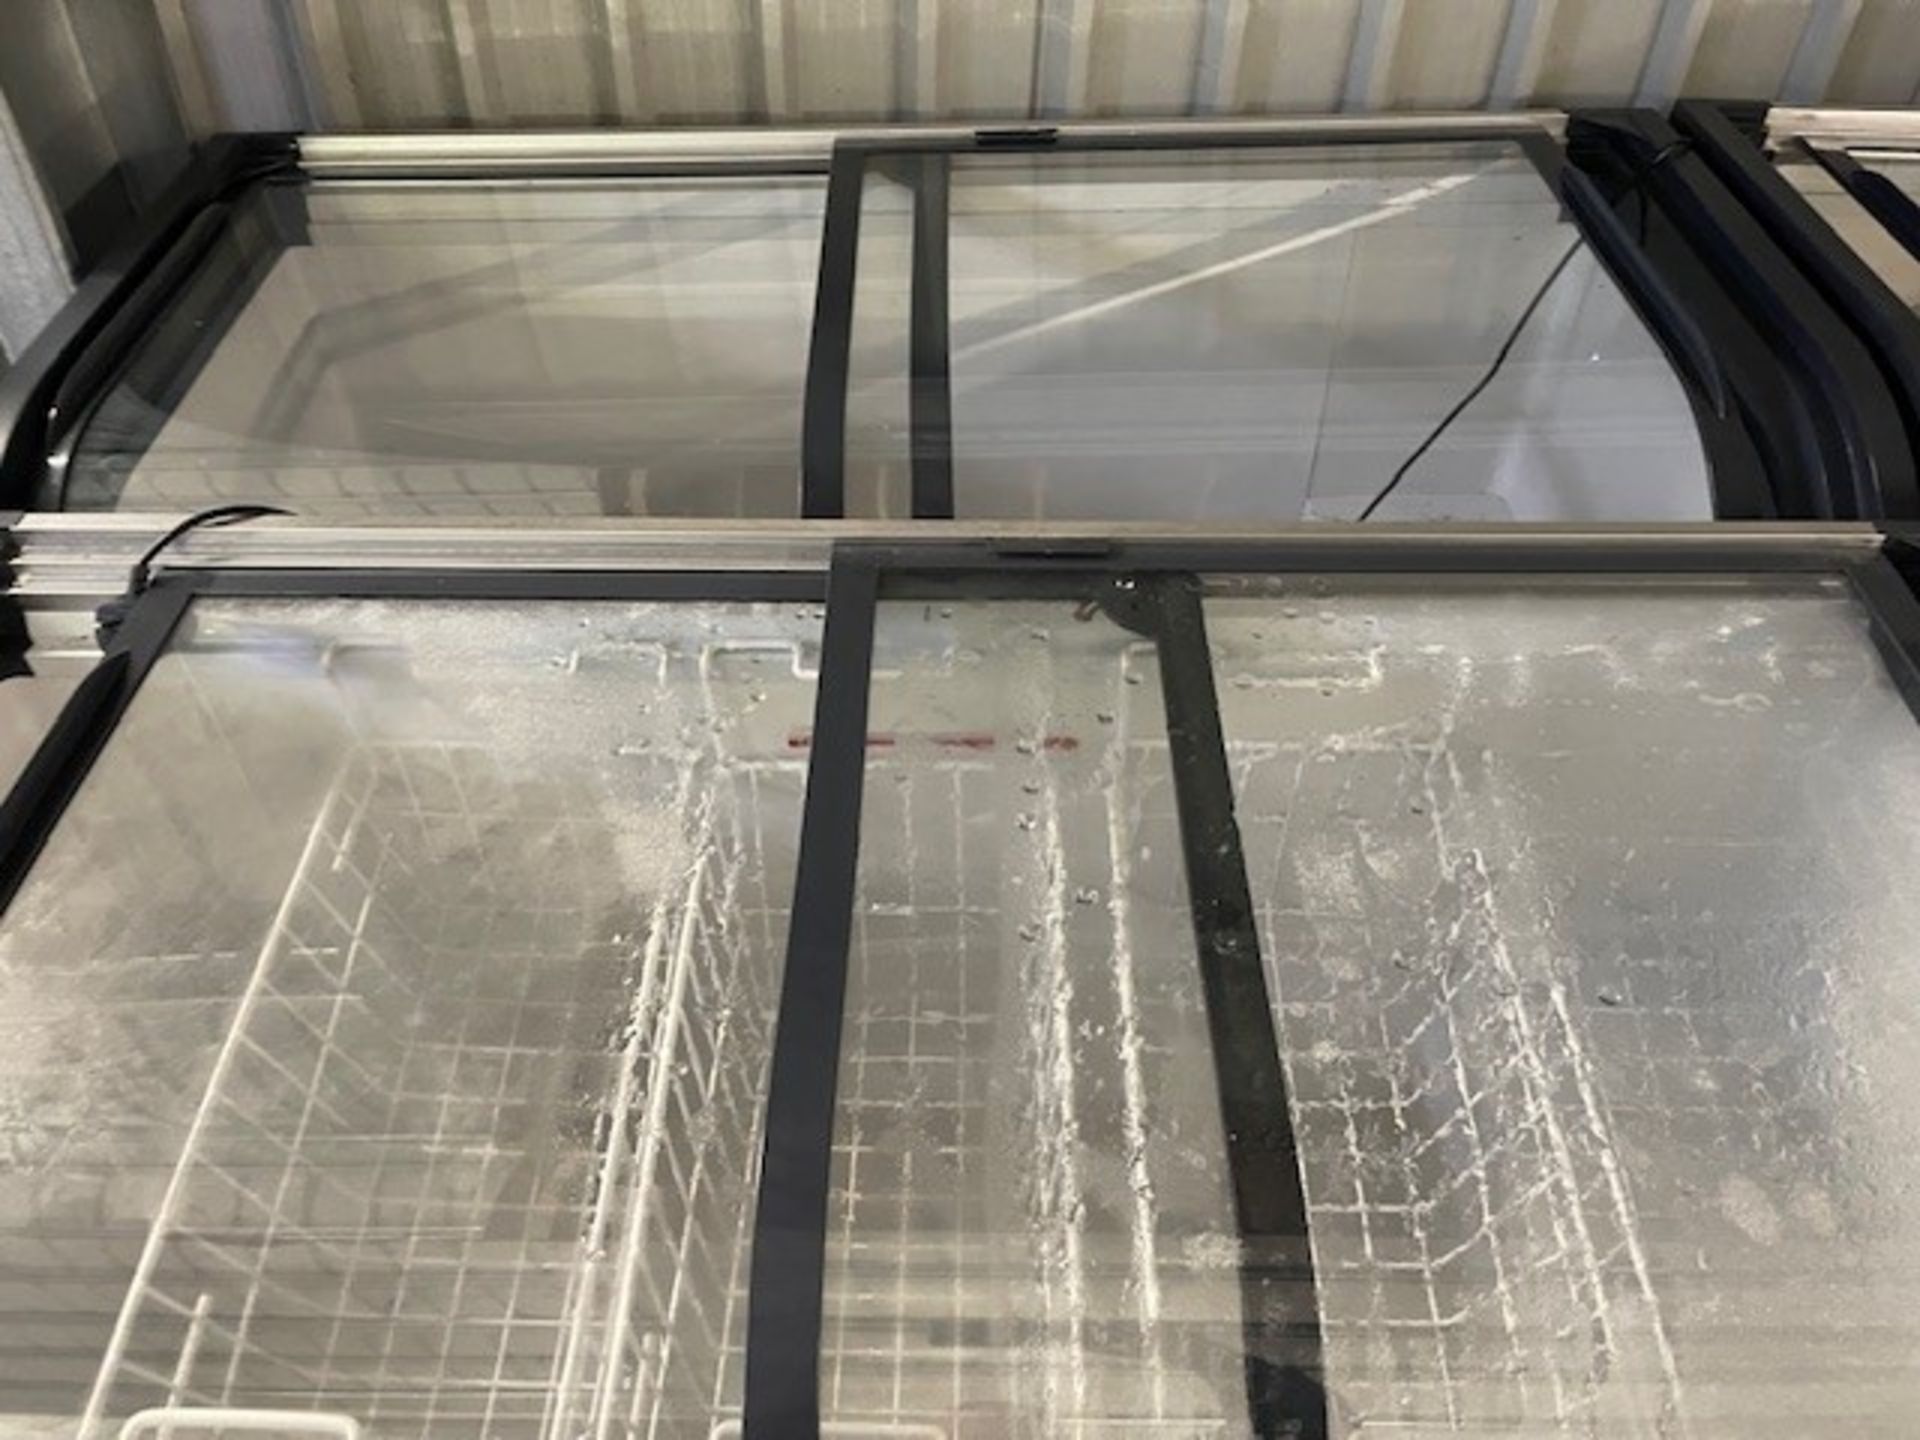 ADEXA SD-520Q CHEST FREEZER *** NOTE ASSET(S) LOCATED IN CROYDON - WILL REQUIRE REMOVAL BY FRIDAY - Image 7 of 9